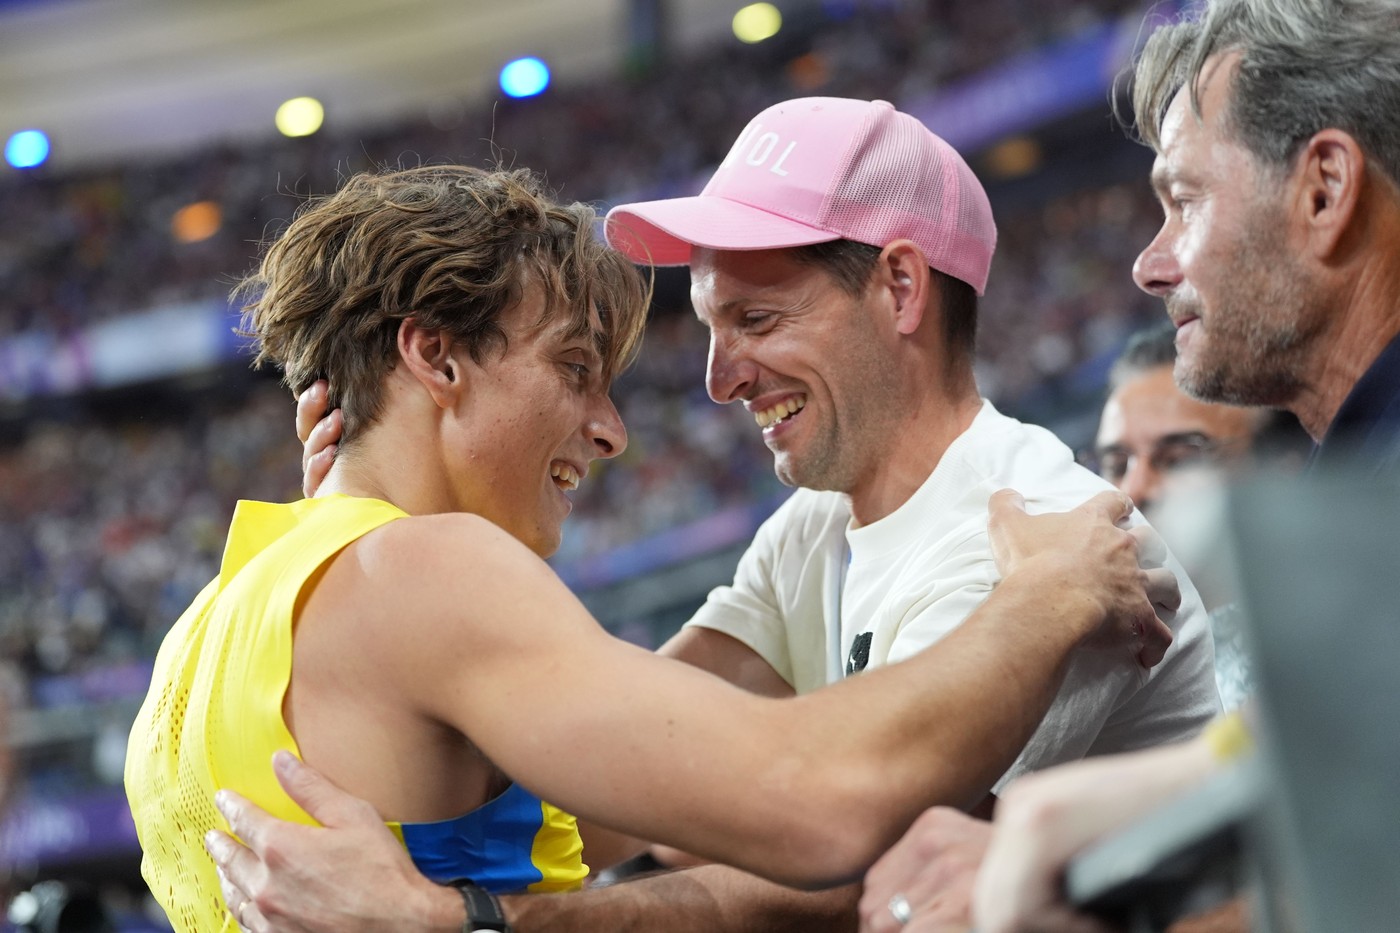 Armand Duplantis of Sweden celebrates with former Olympic champion and World Record holder Renaud Lavillenie of France after winning gold and setting a new World Record in the Men's Pole Vault
Paris 2024 Olympic Games, Day Ten, Paris, France - 05 Aug 2024,Image: 896314536, License: Rights-managed, Restrictions: , Model Release: no